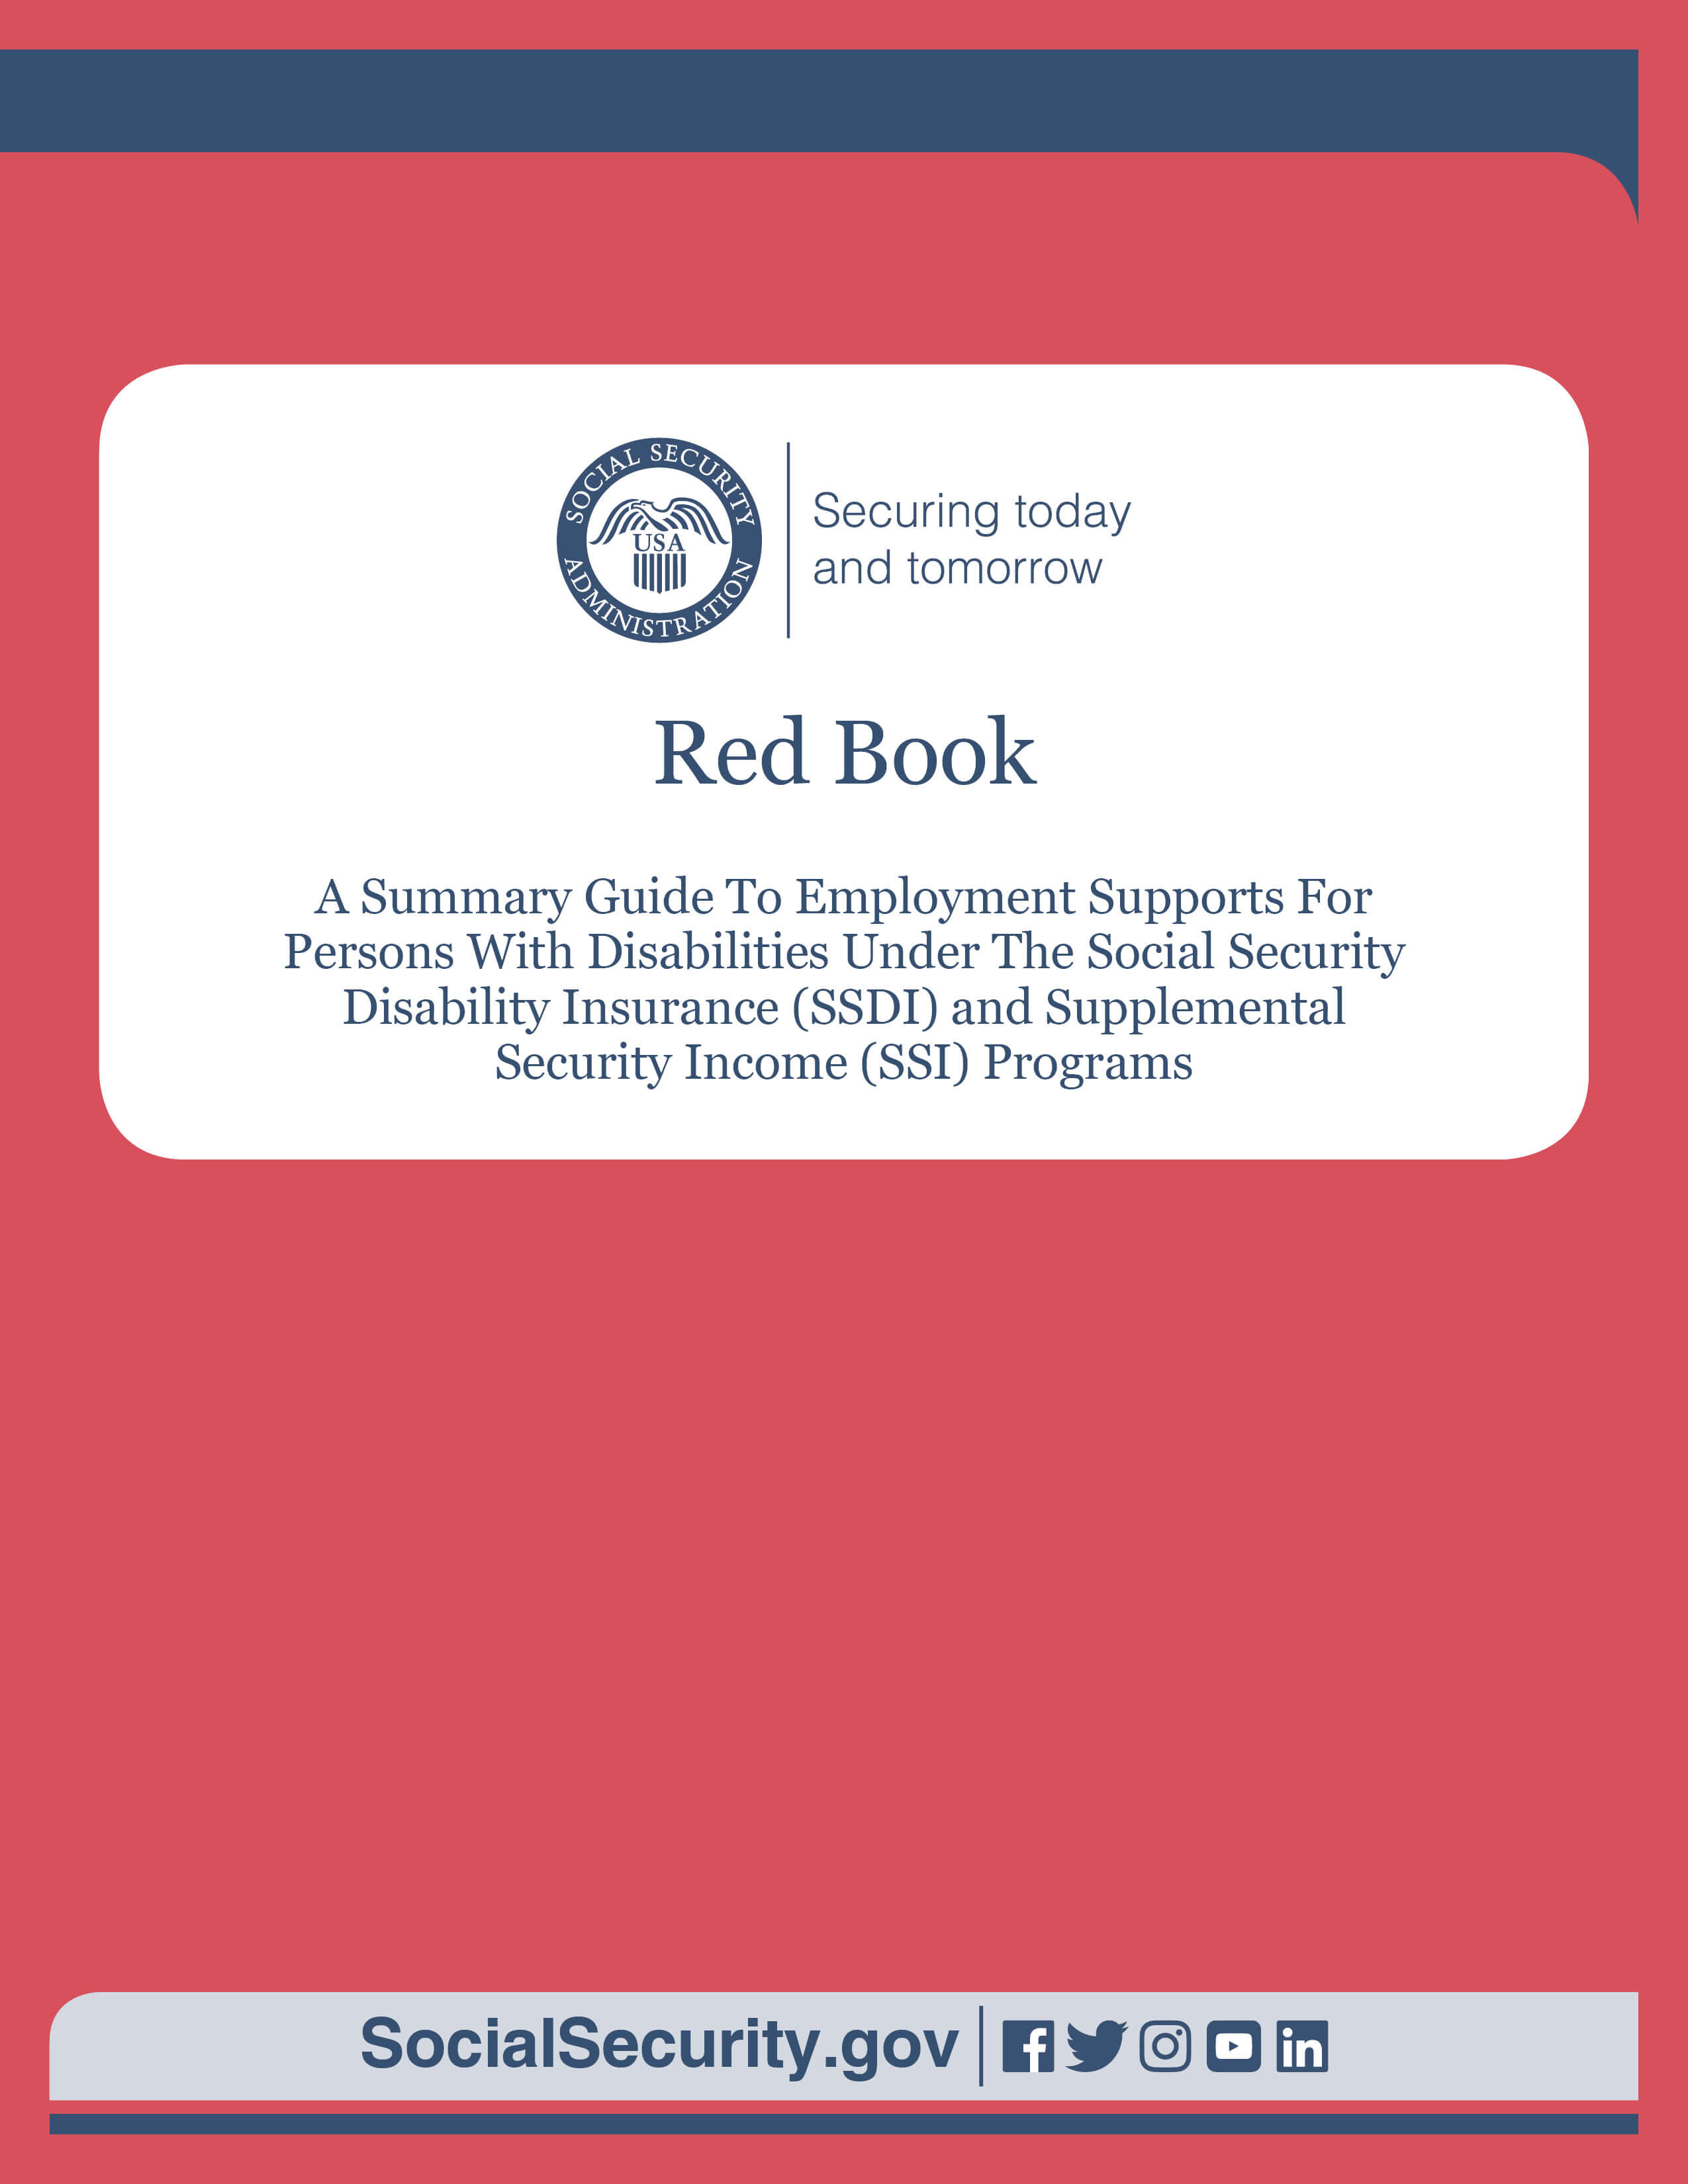 Social Security's 2020 Red Book cover